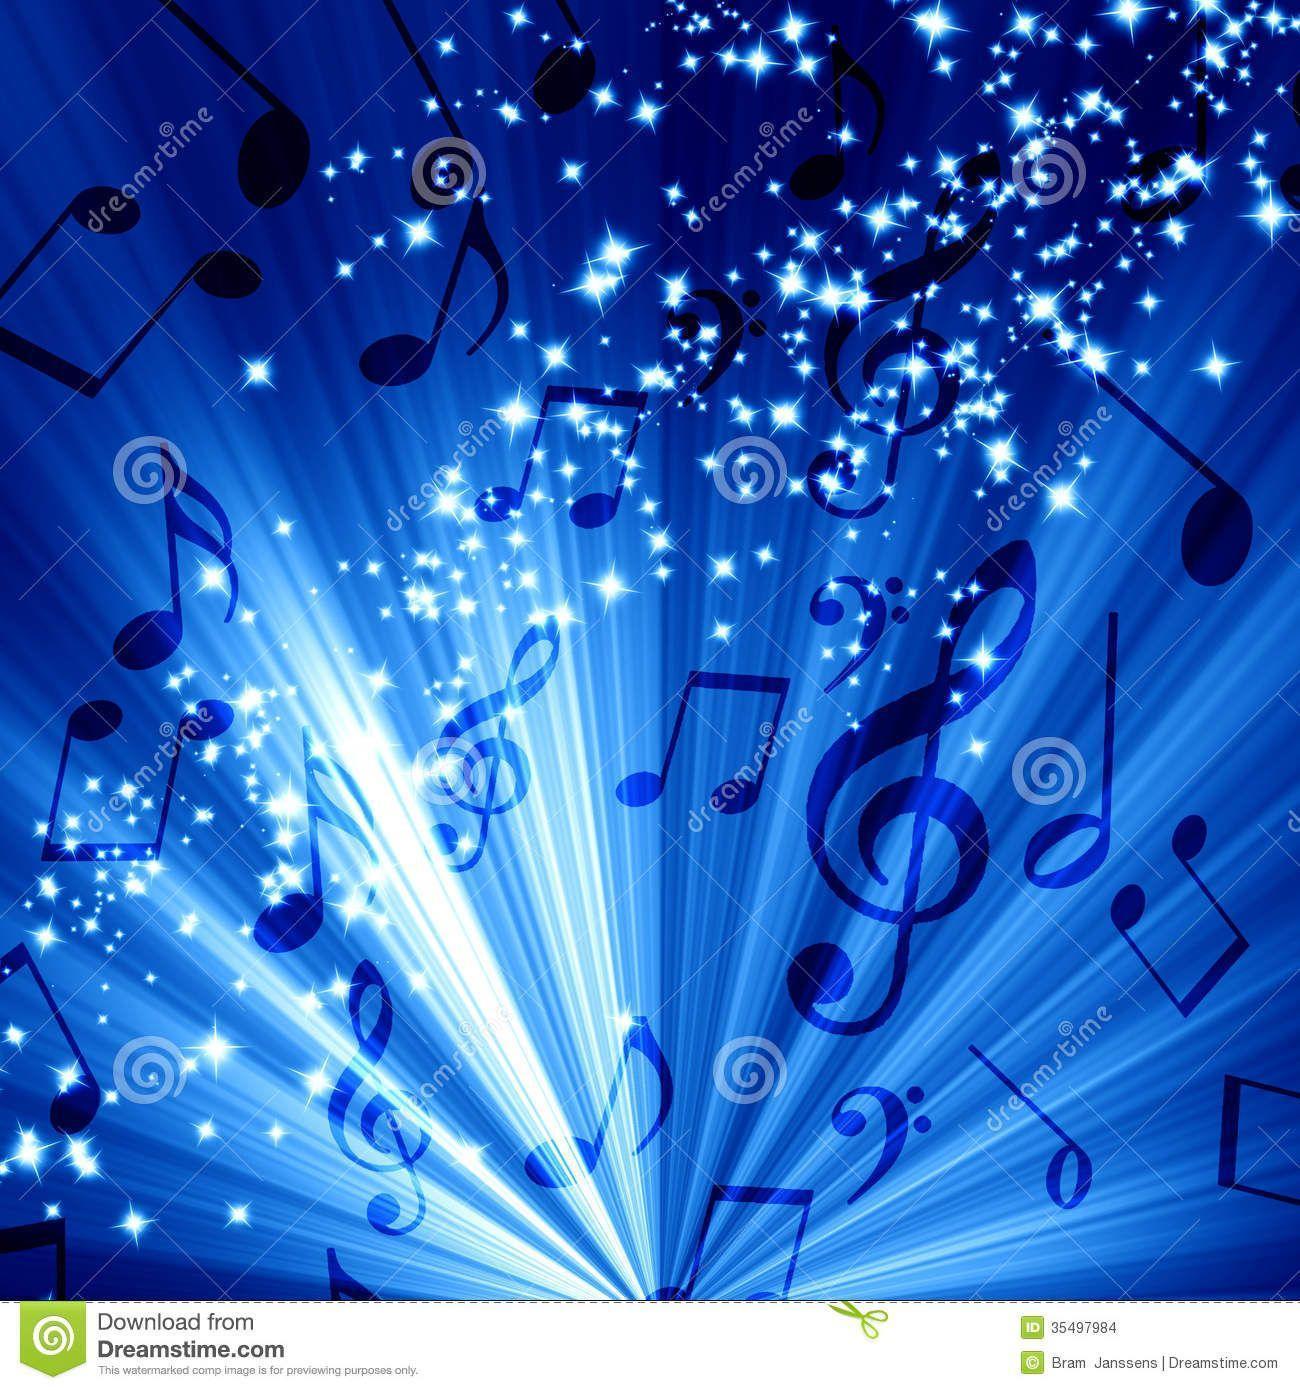 Music Note Background Blue HD Picture 4 HD Wallpaper. lzamgs